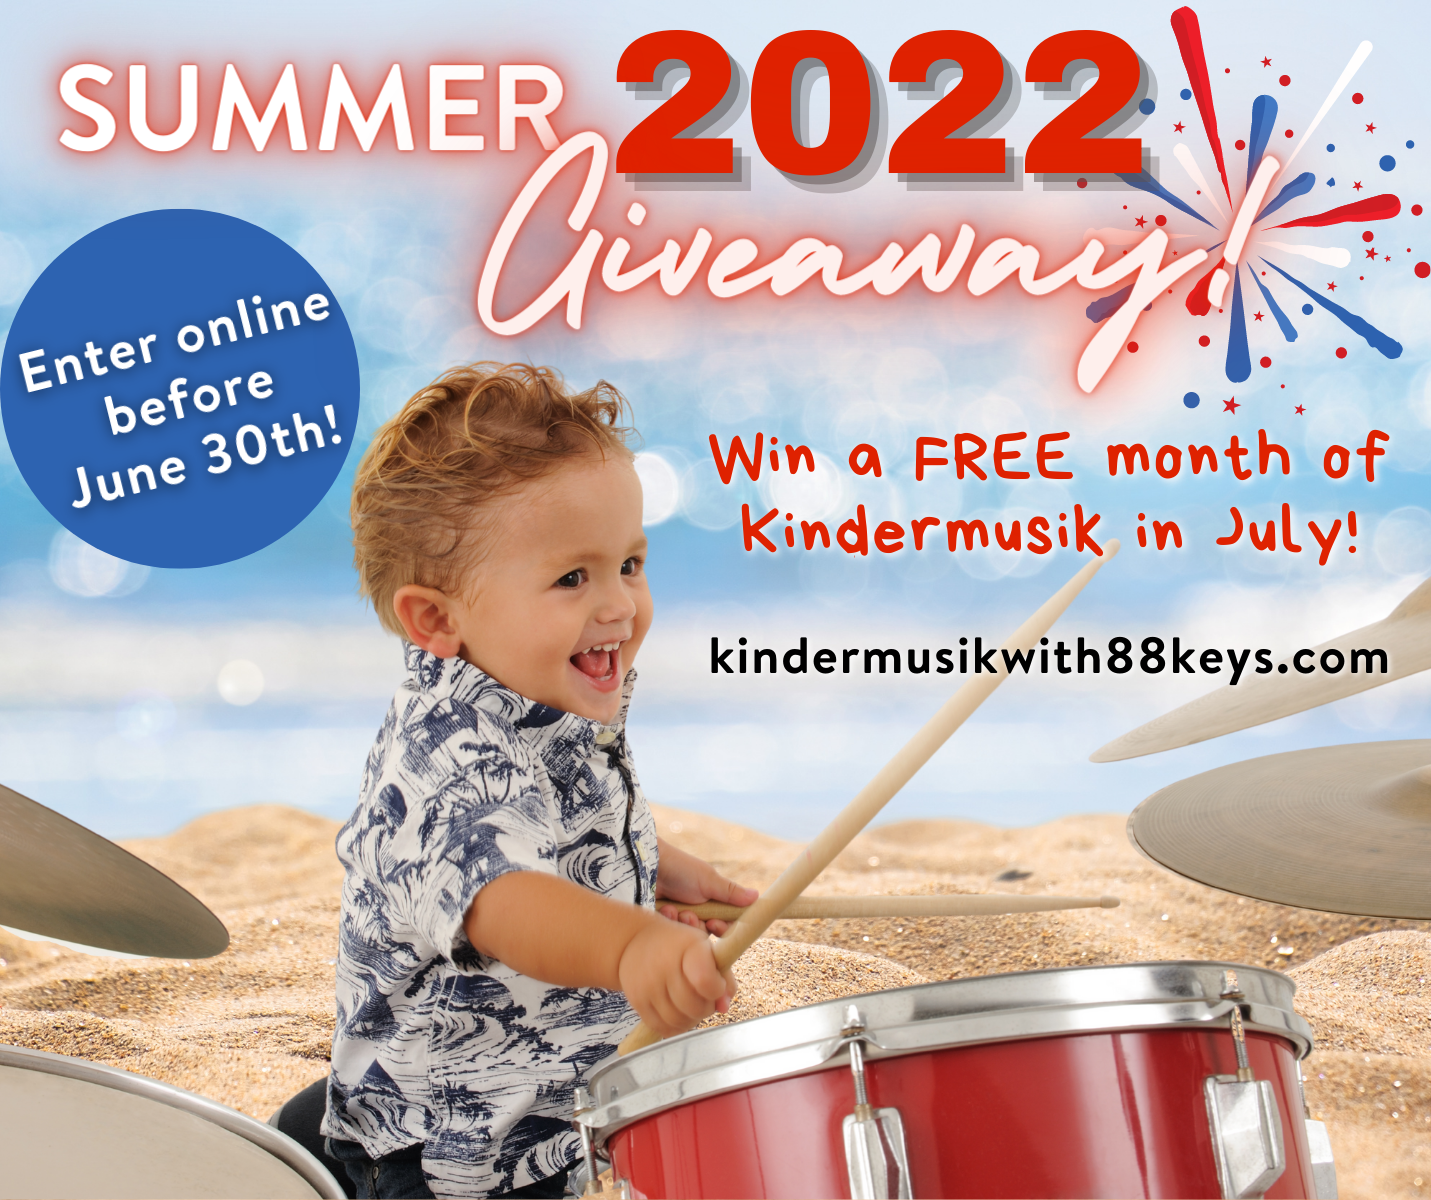 Summer 2022 Giveaway: Win FREE Kindermusik in July!